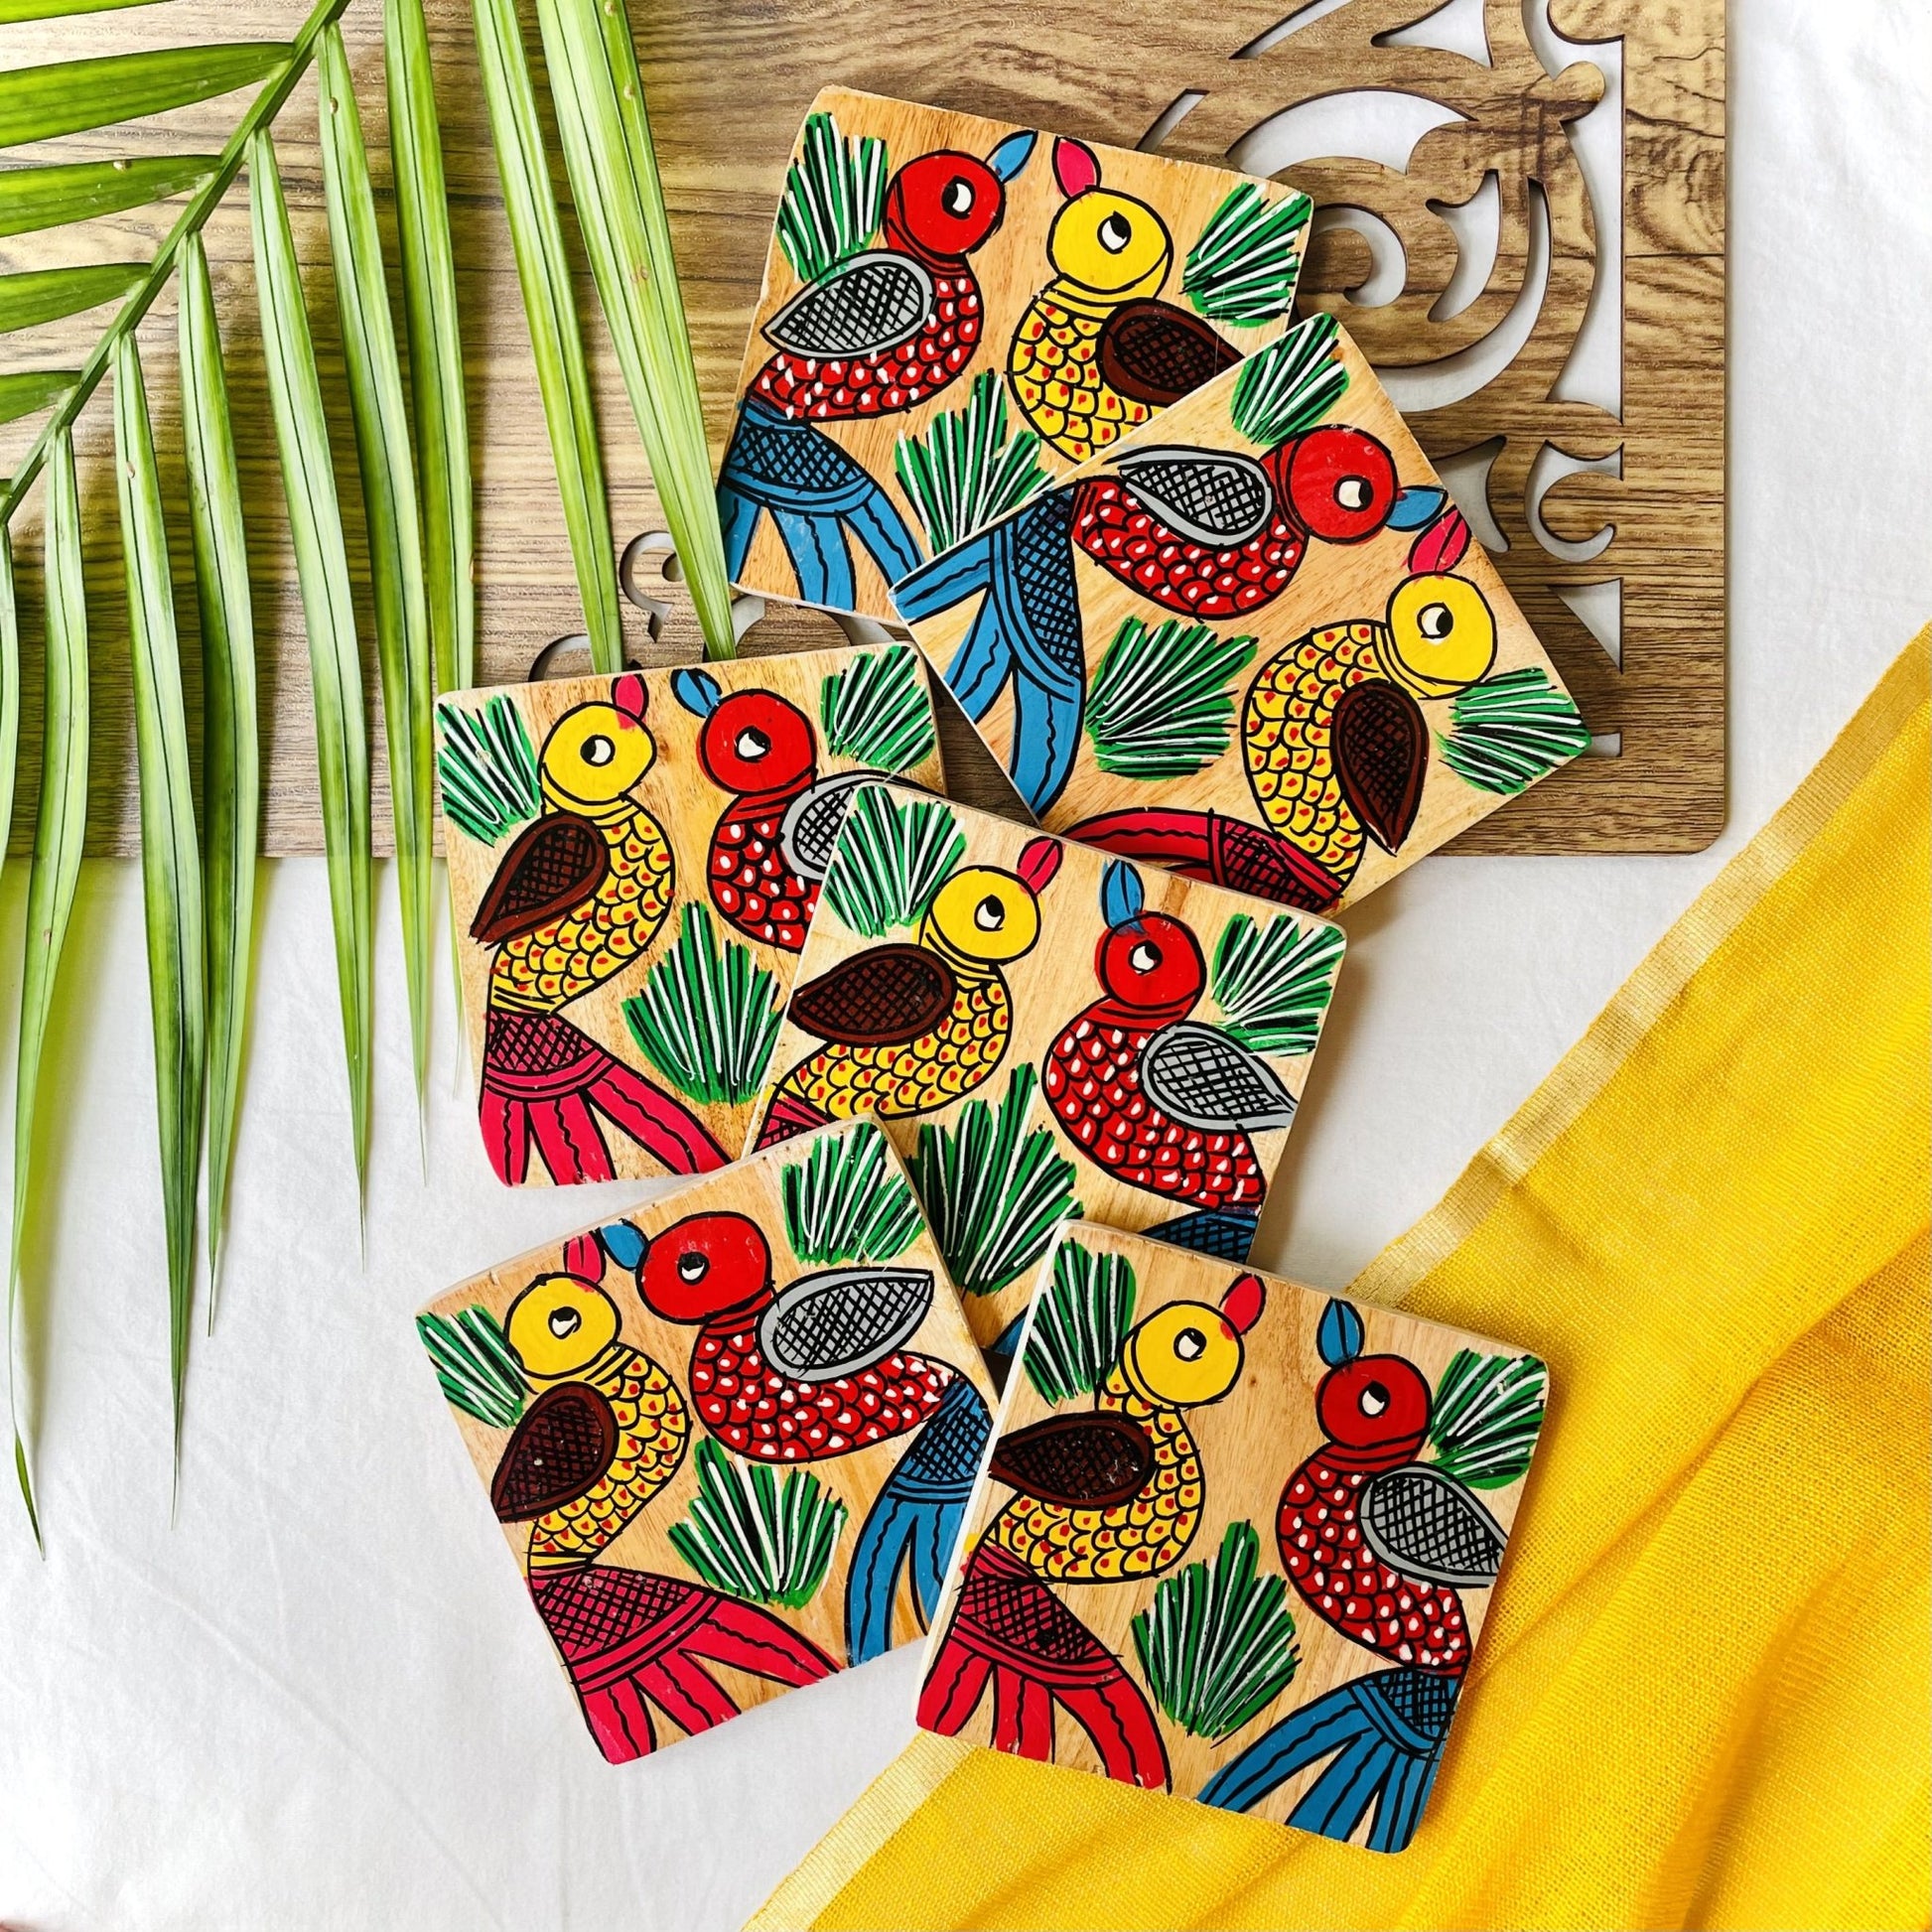 Six pure mango wood square wood coasters painted with one yellow bird with red feathers and a beak and one red with blue feathers and a beak along with some leaf in each wood coaster are placed on a brown wood board with leaves in the background